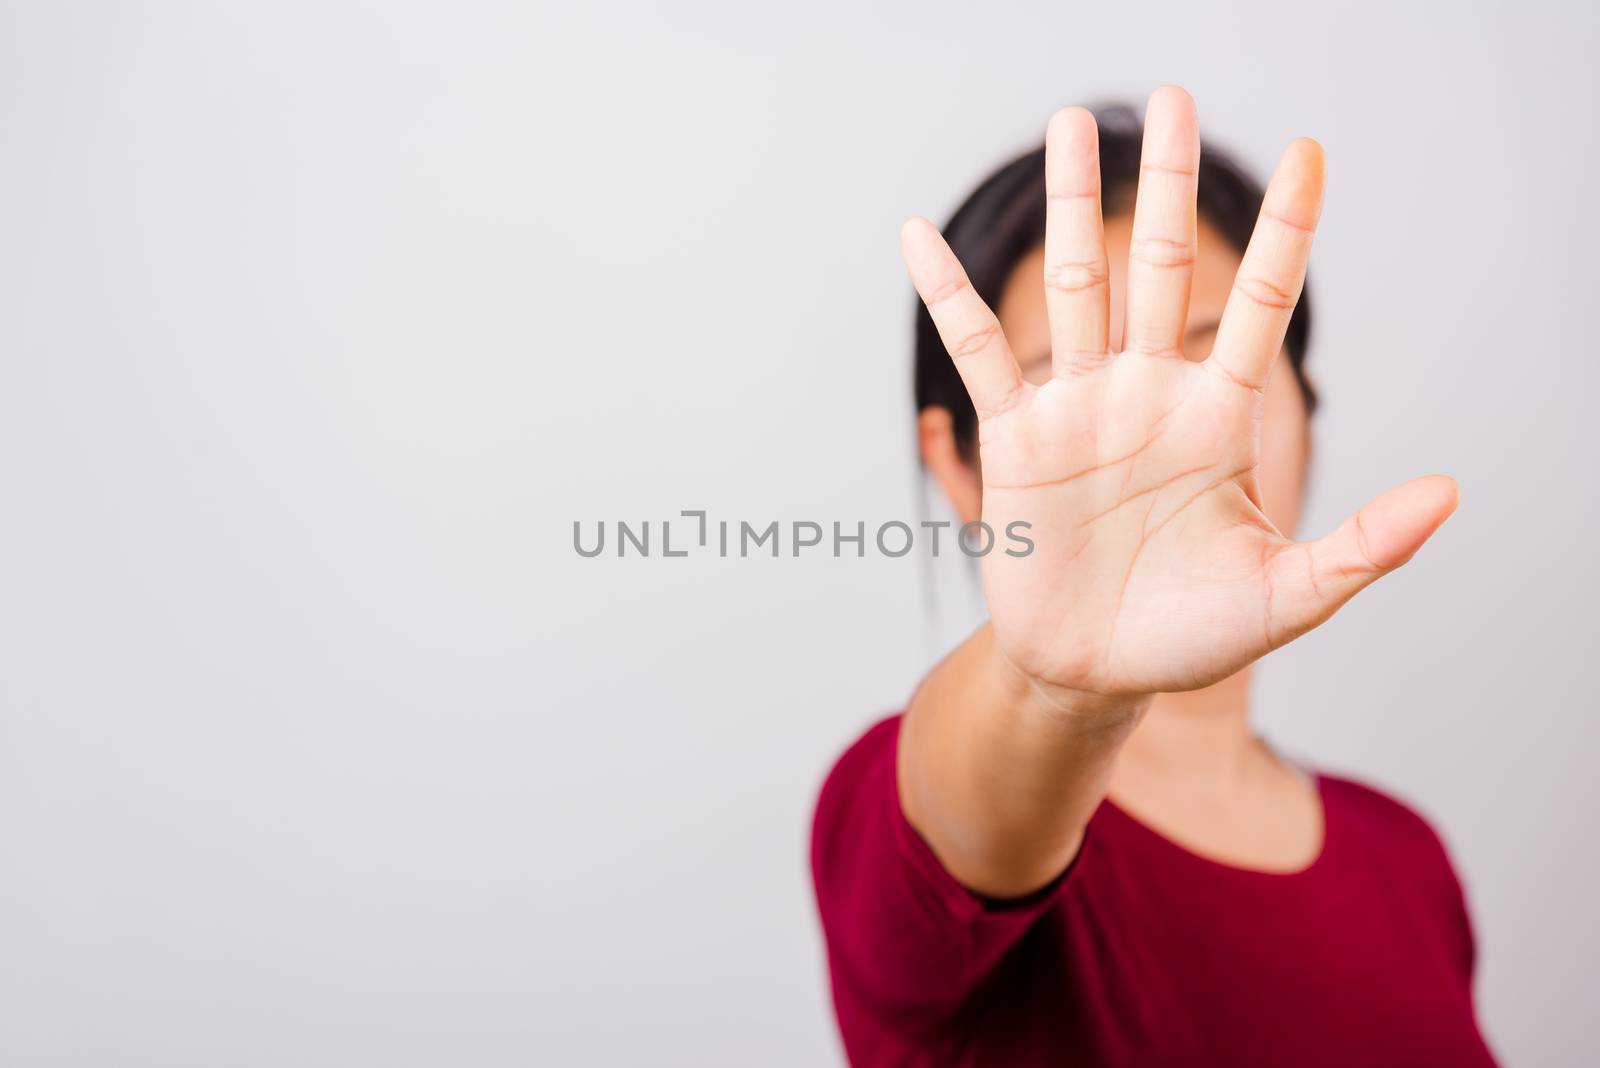 Asian beautiful woman itching her outstretched hand showing stop gesture front face, focus on hand on white background with copy space